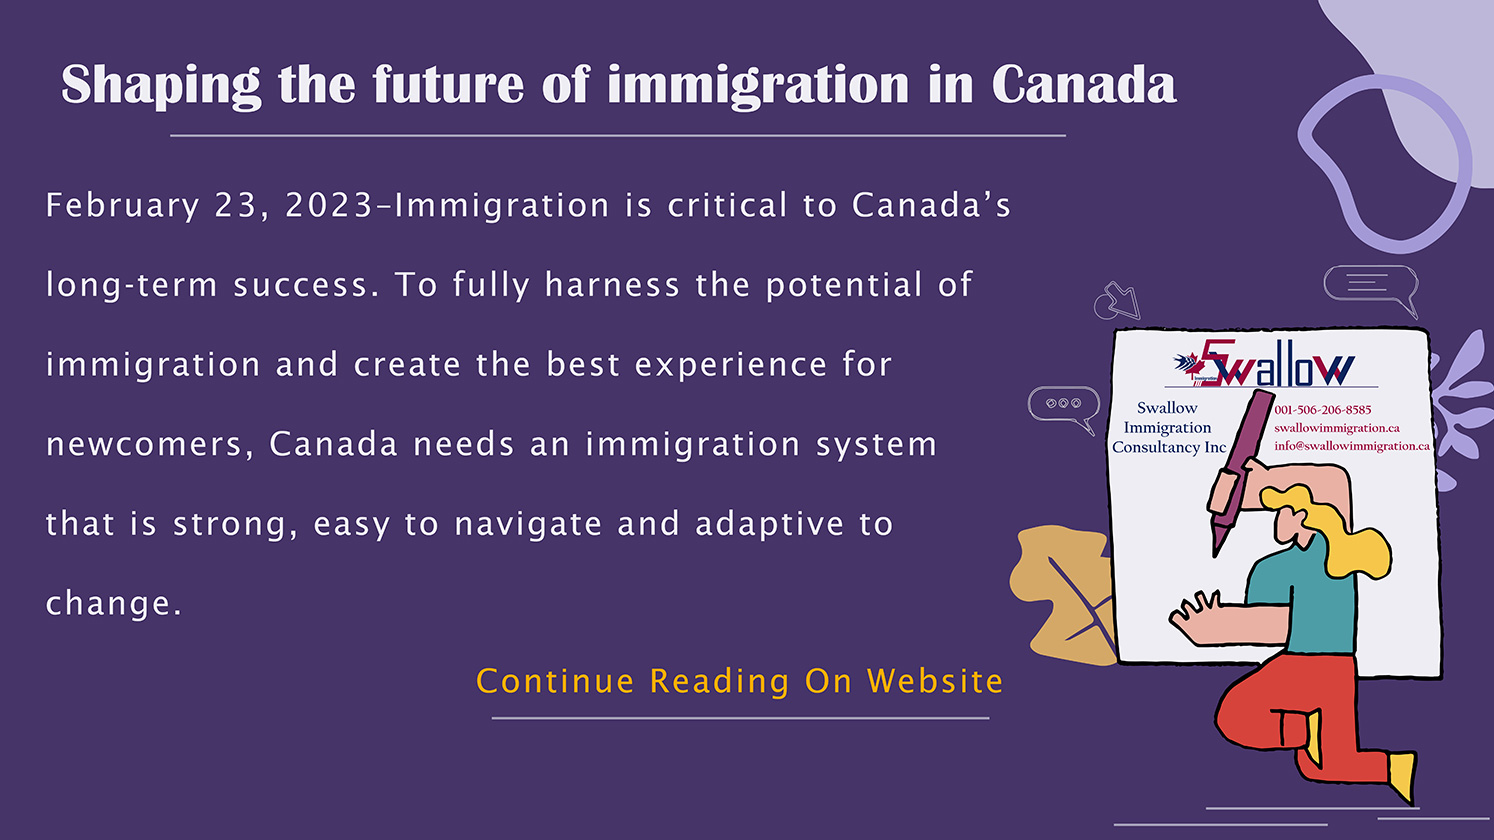 Shaping the future of immigration in Canada